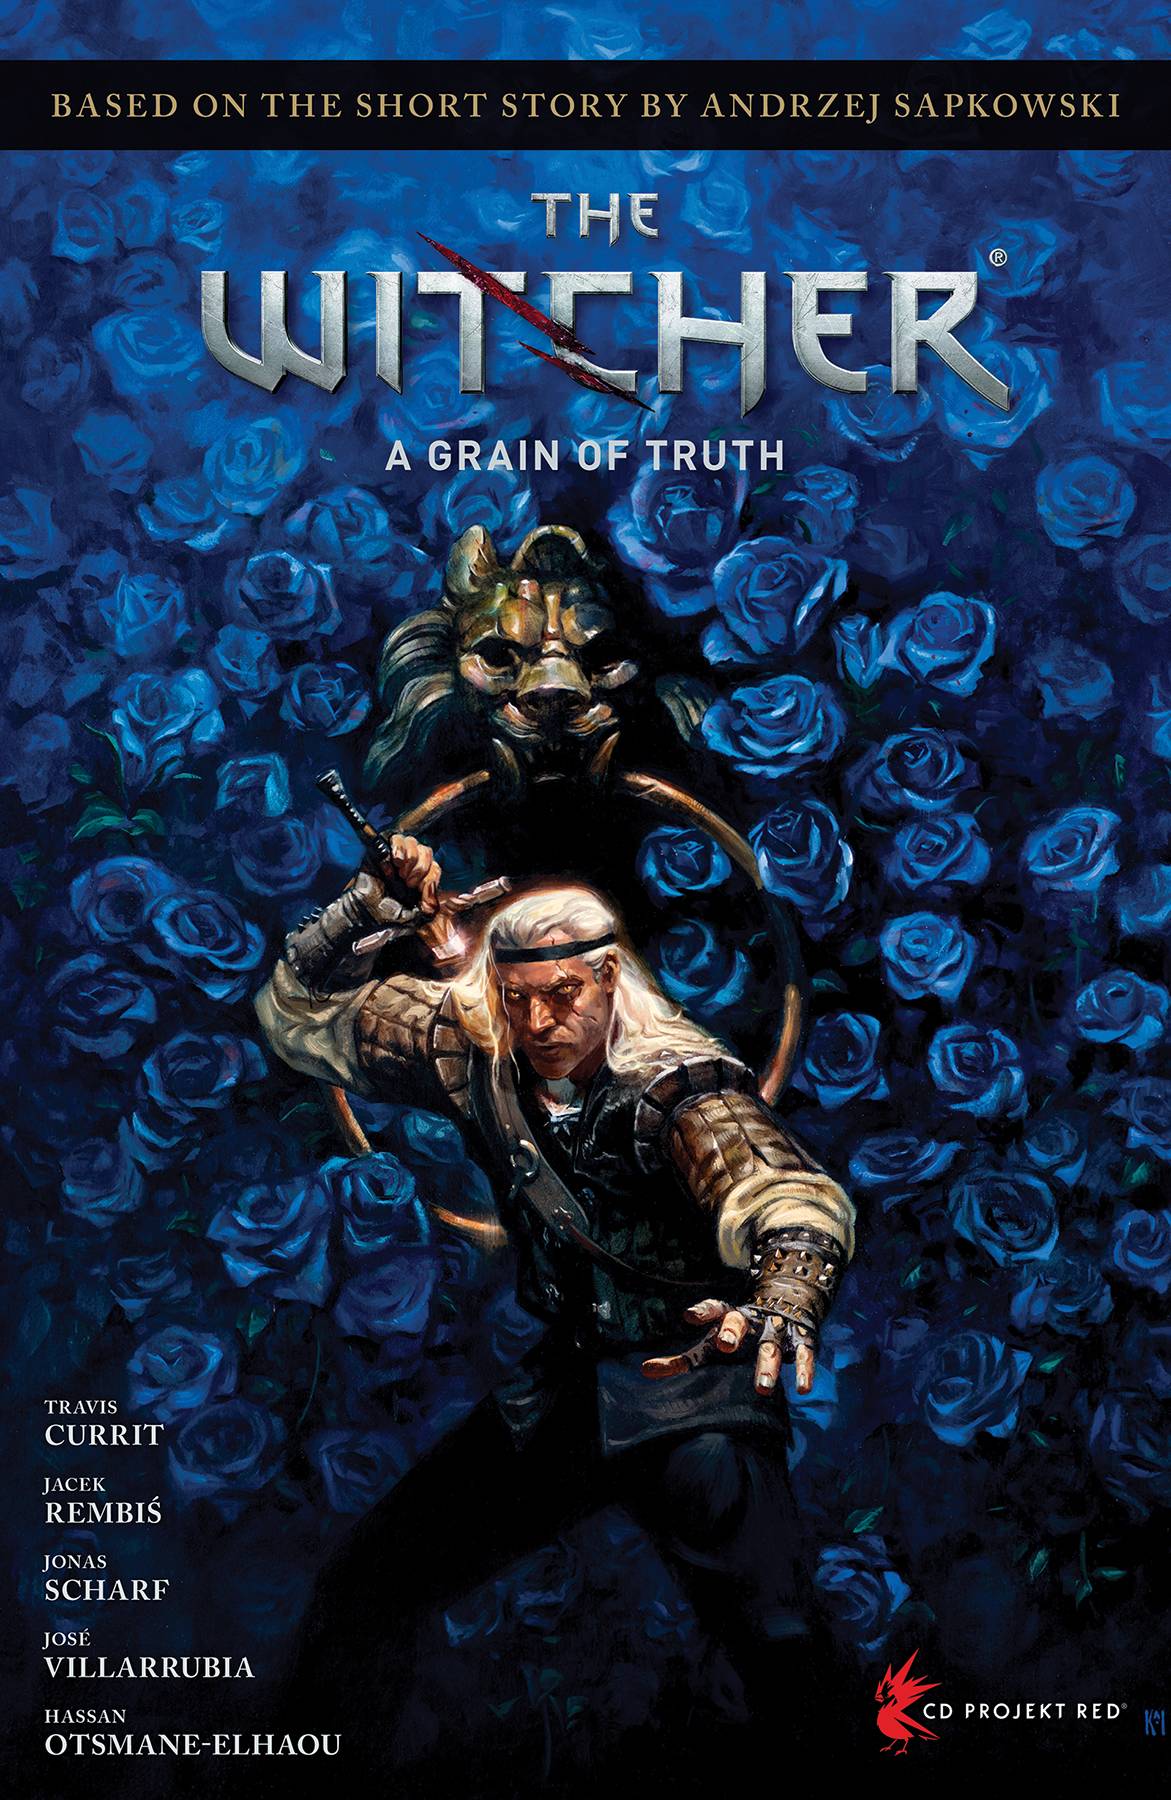 ANDRZEJ SAPKOWSKIS THE WITCHER A GRAIN OF TRUTH HC - King Gaming 